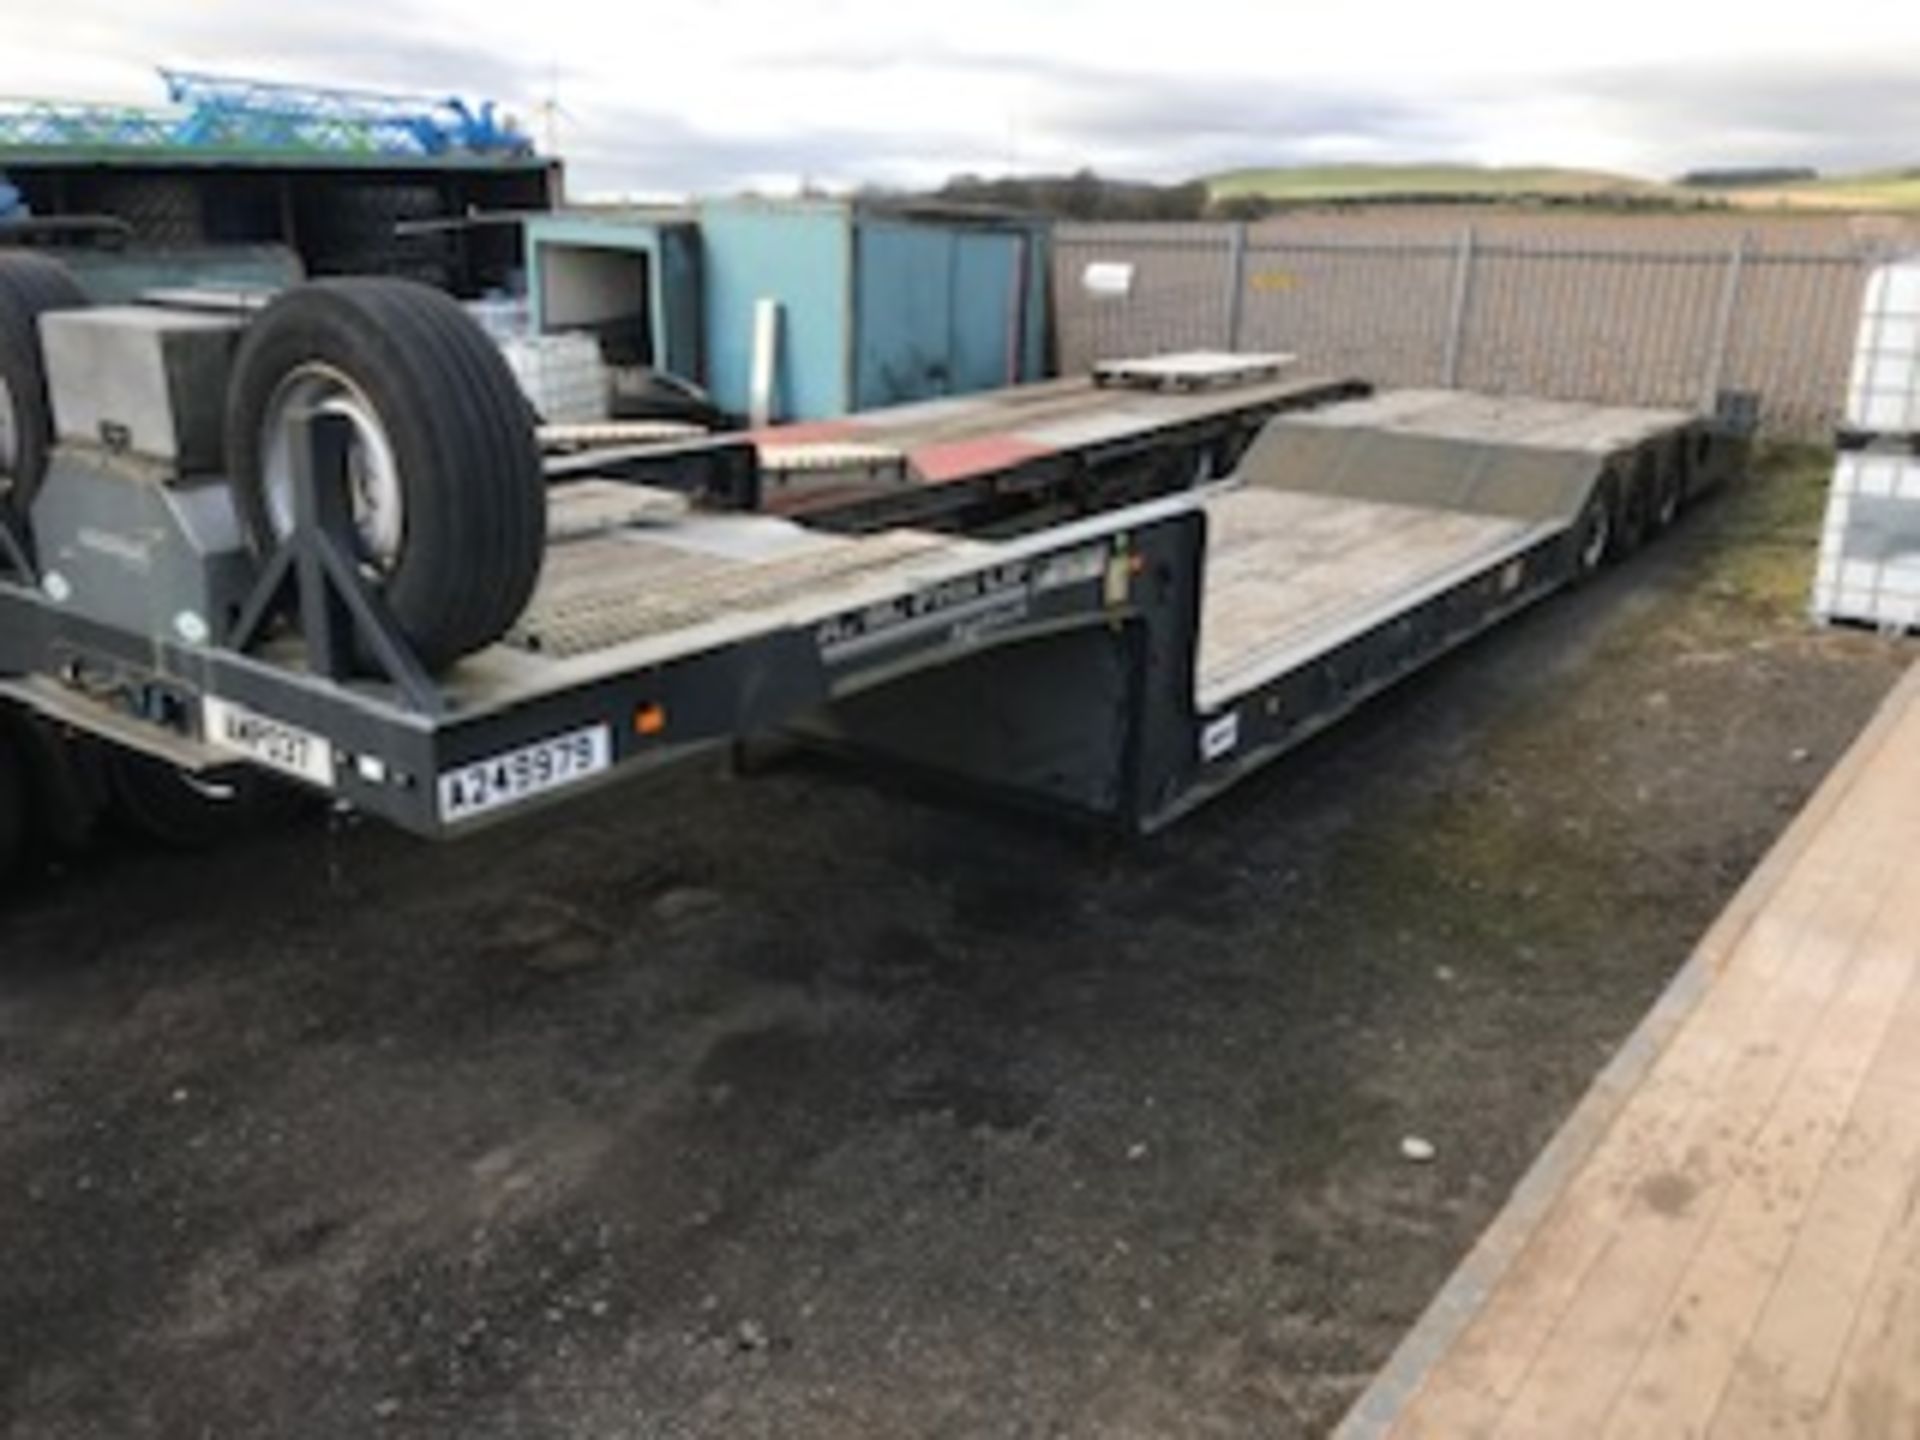 1997 Transporter engineer recovery trailer c/w ramps and electric winch - Image 2 of 11